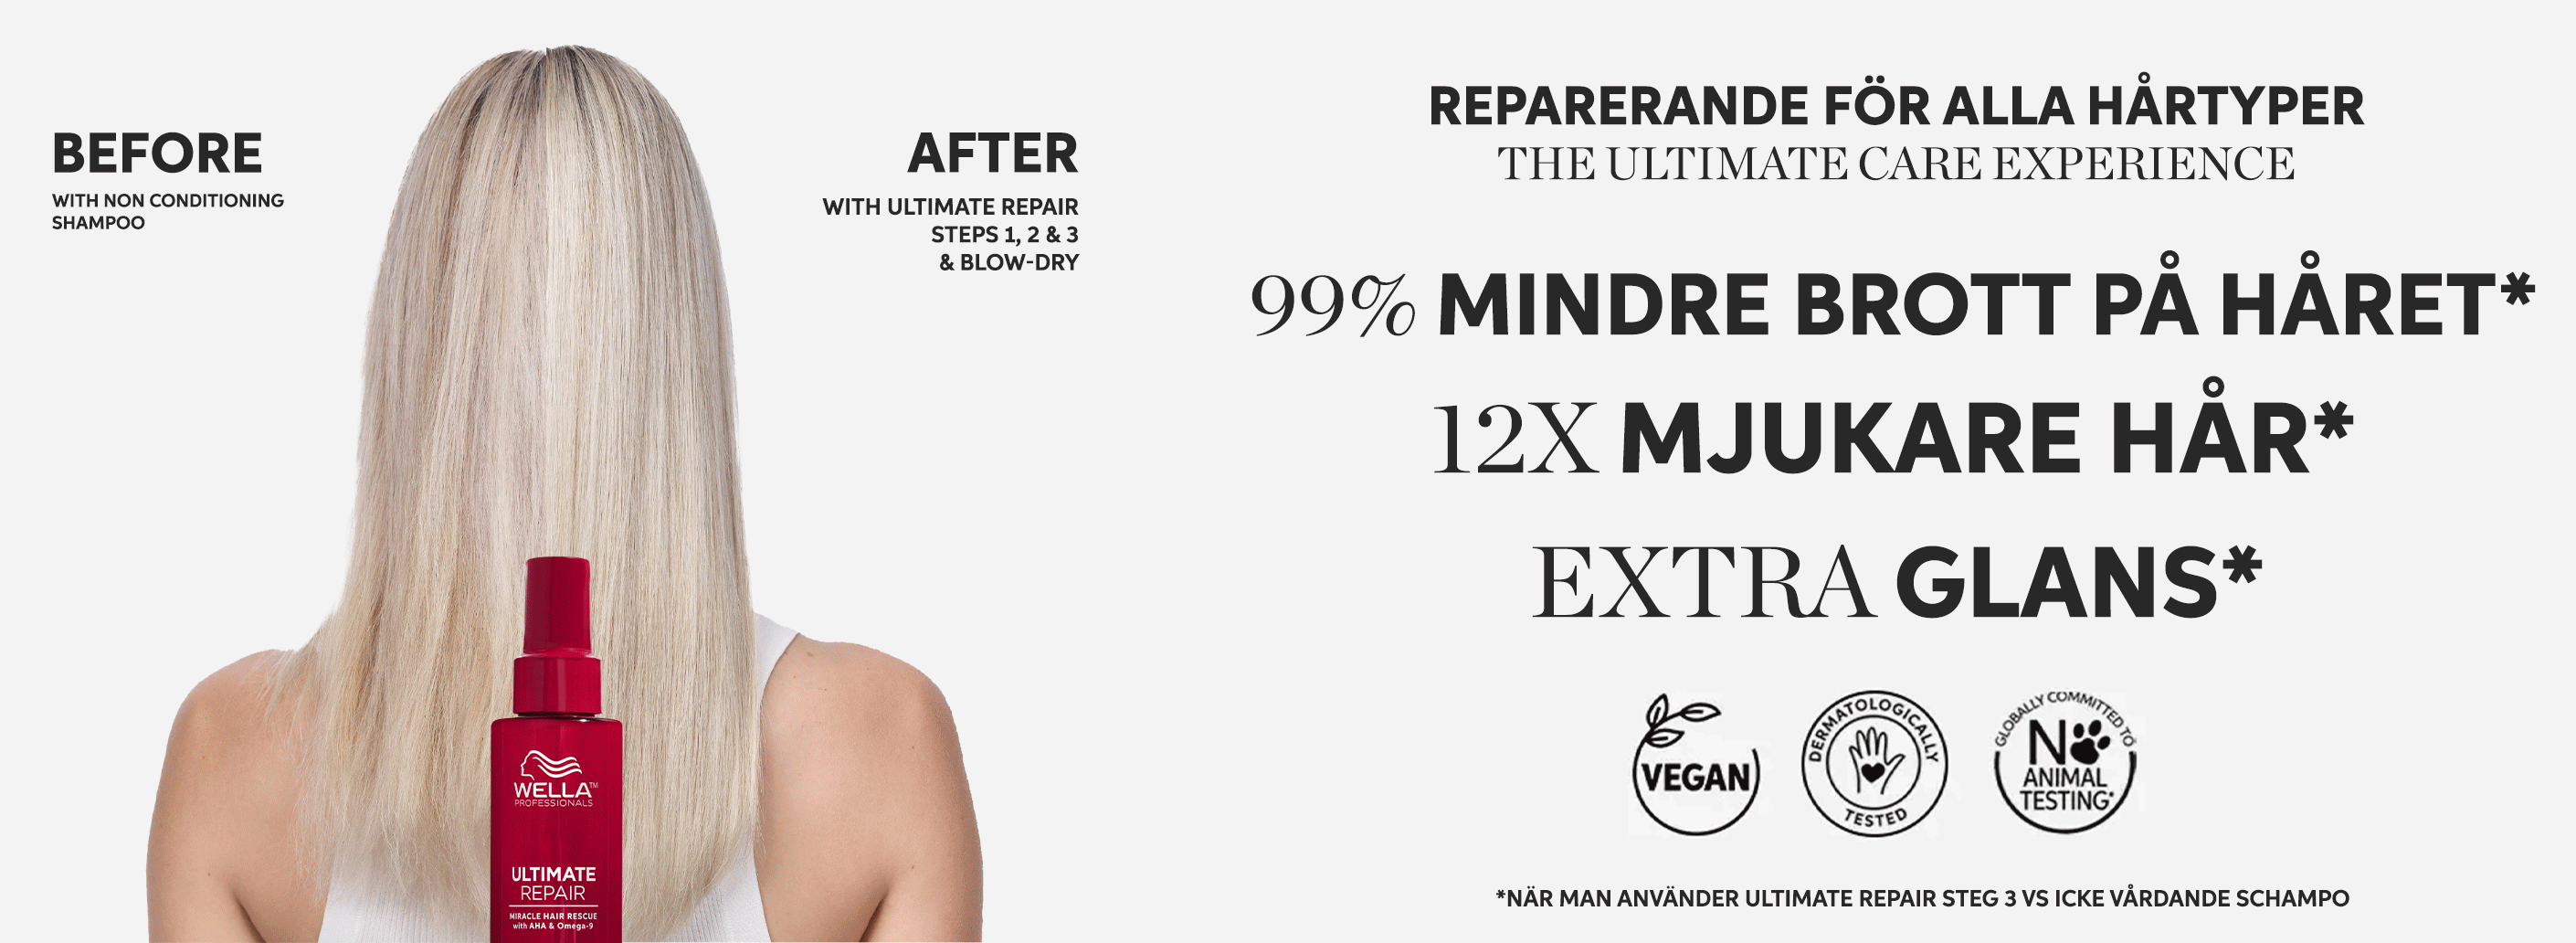 Ultimate Repair is for all types of hair!